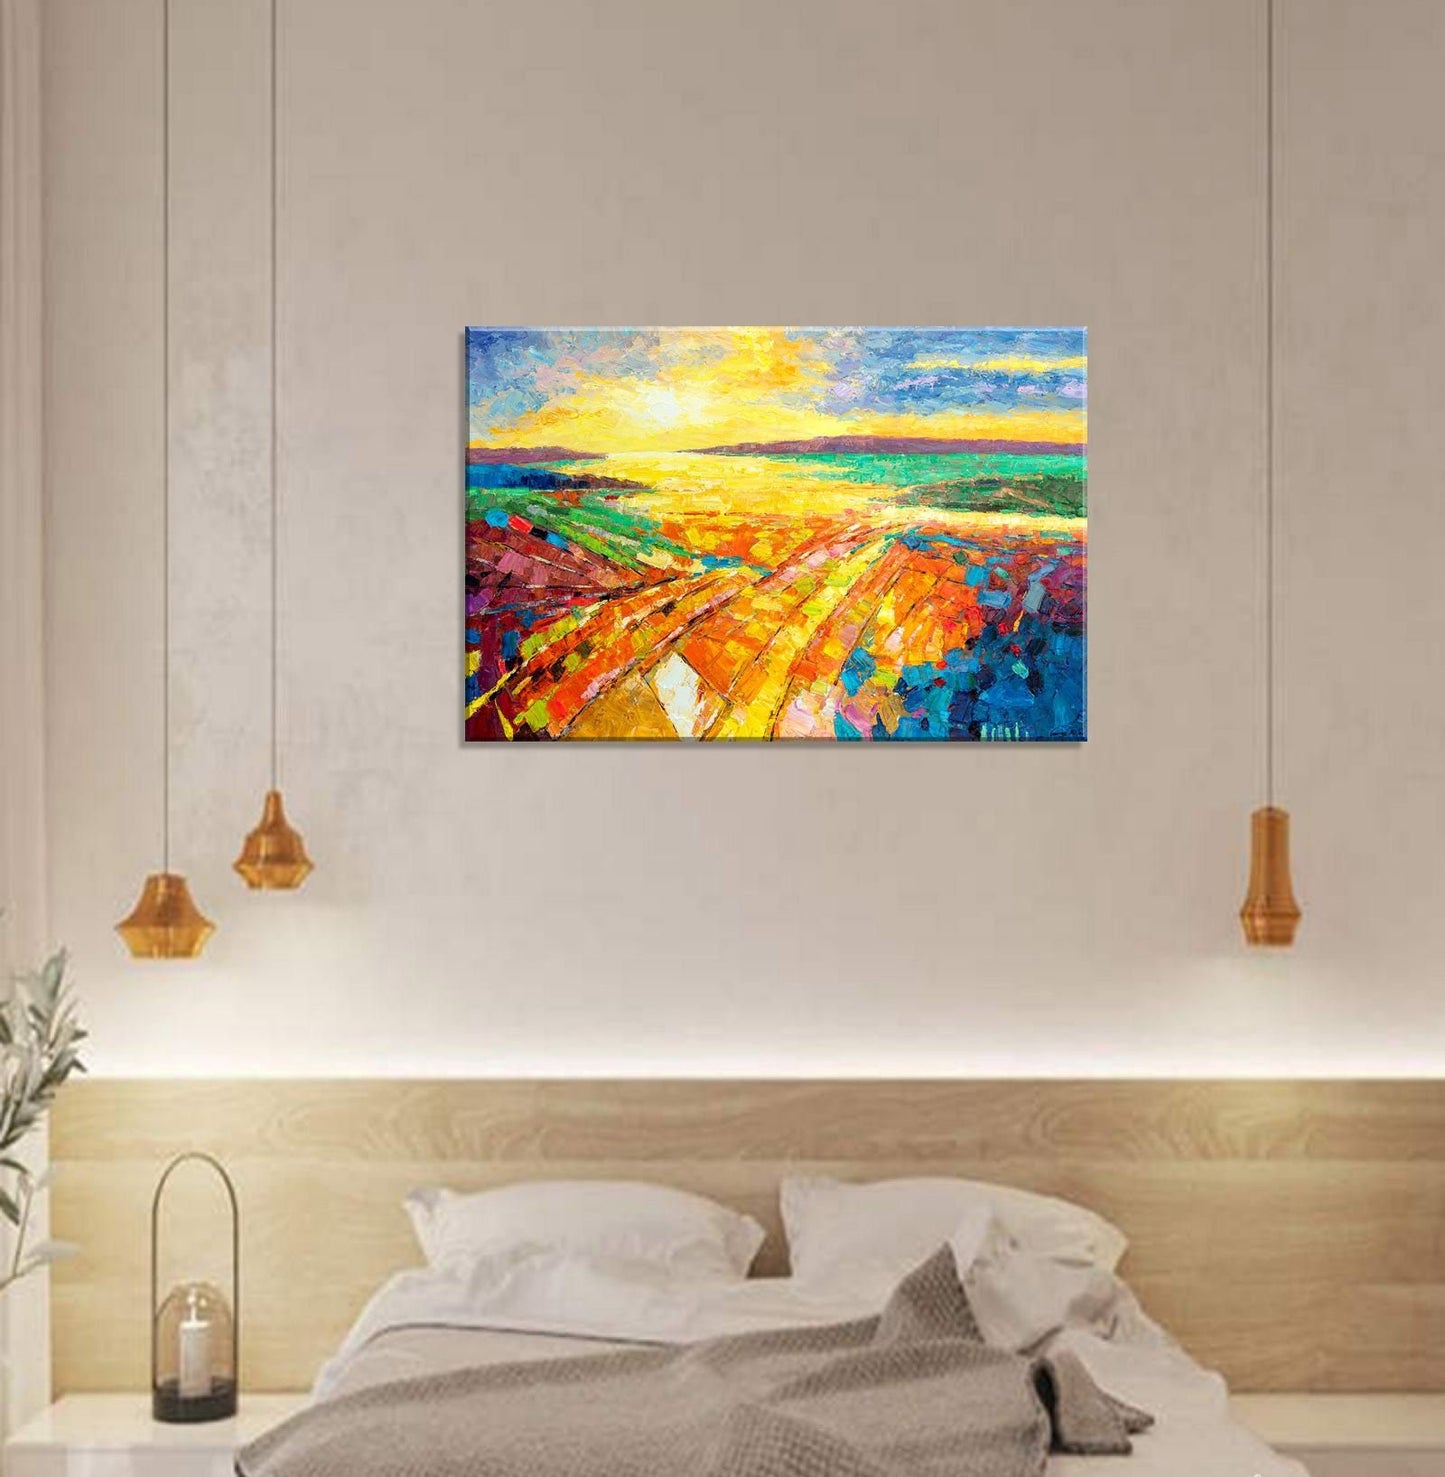 Abstract Painting, Original Oil Painting, Abstract Art, Bedroom Decor, Abstract Canvas Art, Large Art, Contemporary Painting, Wall Hanging